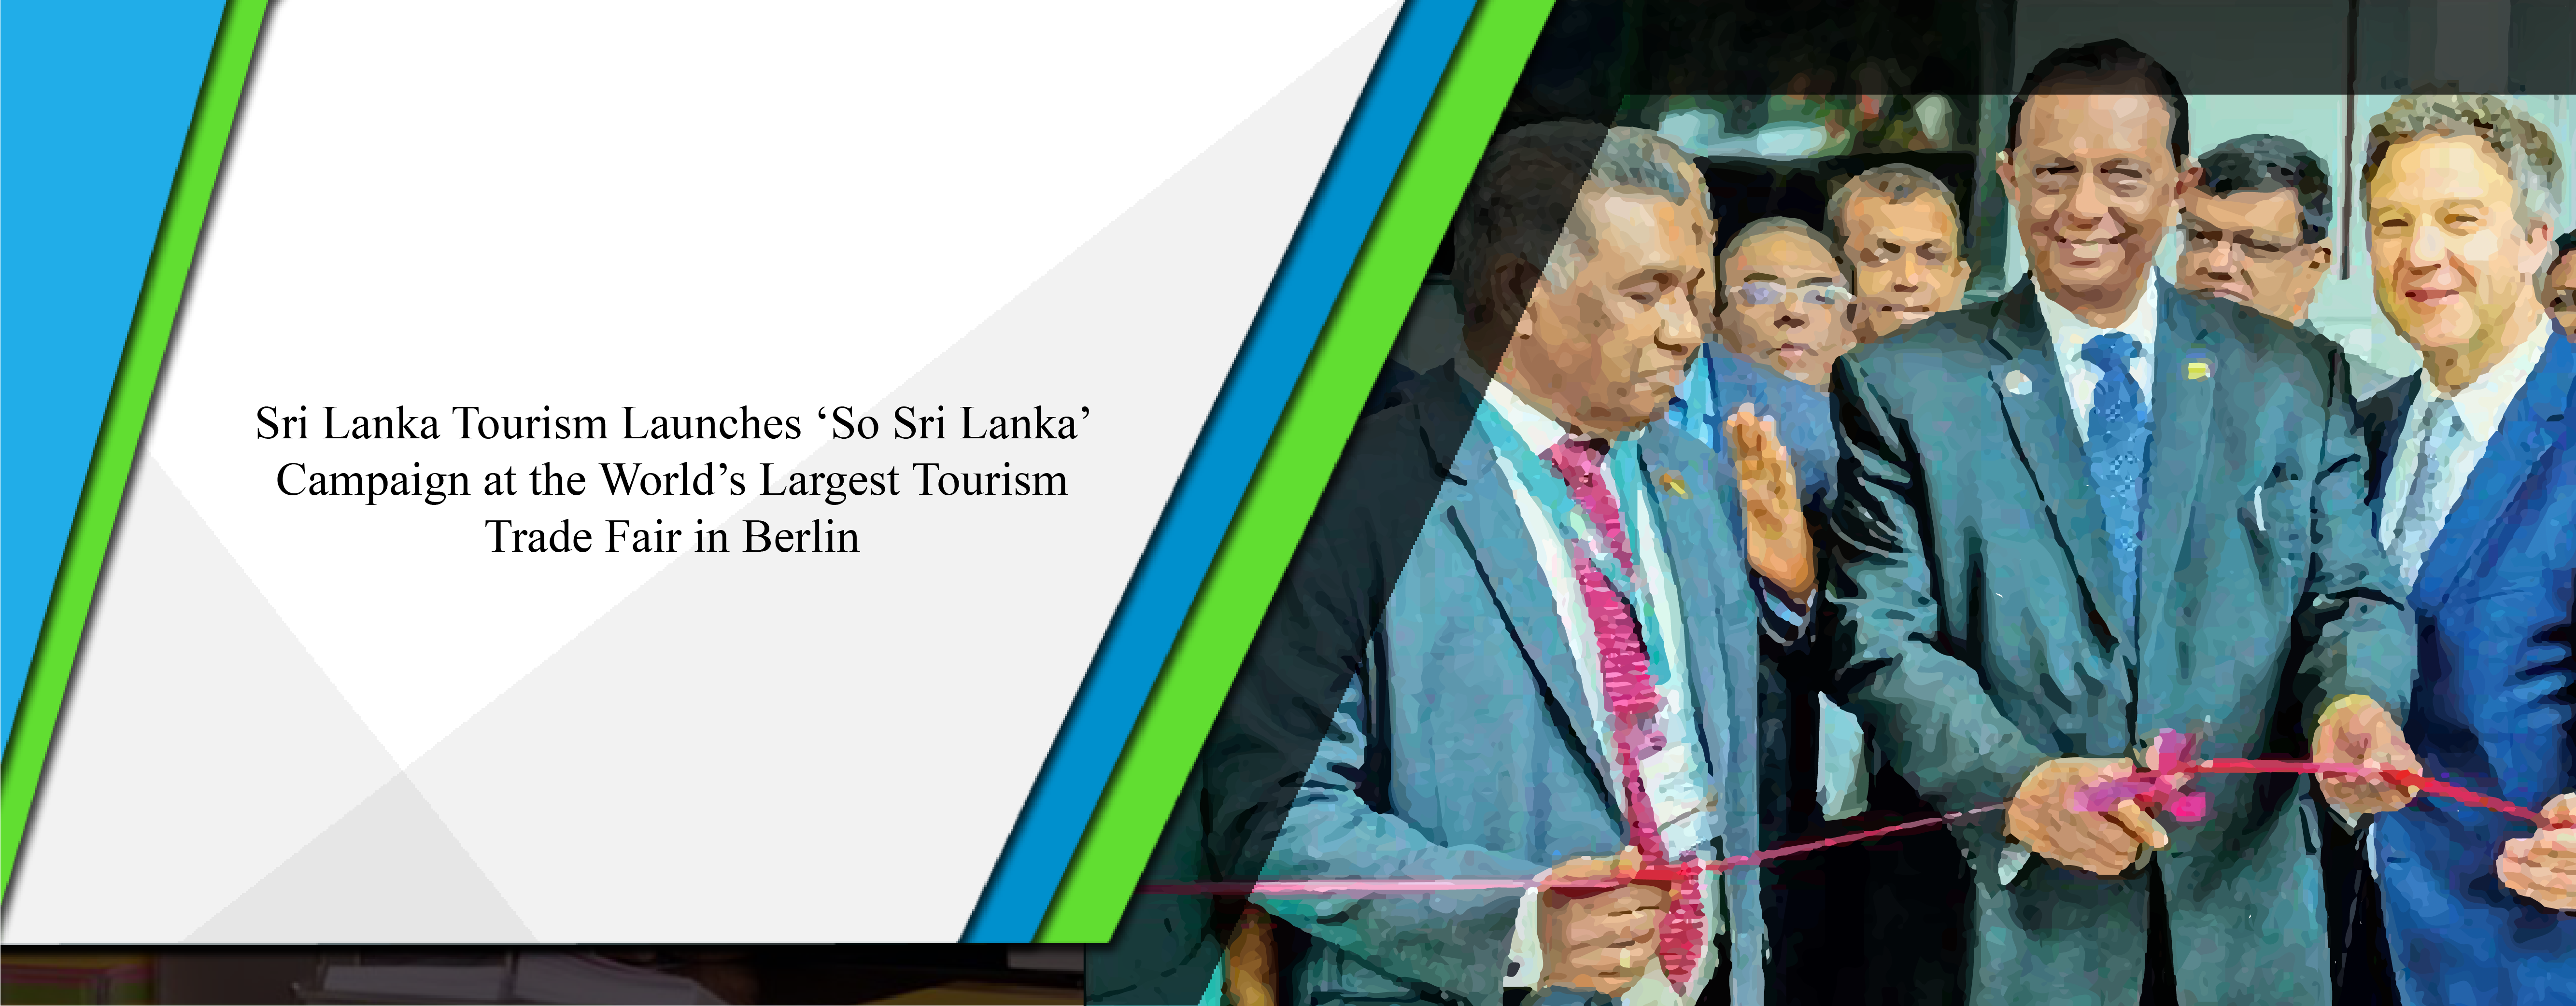 Sri Lanka Tourism launches ‘So Sri Lanka’ campaign at the world’s largest tourism trade fair in Berlin